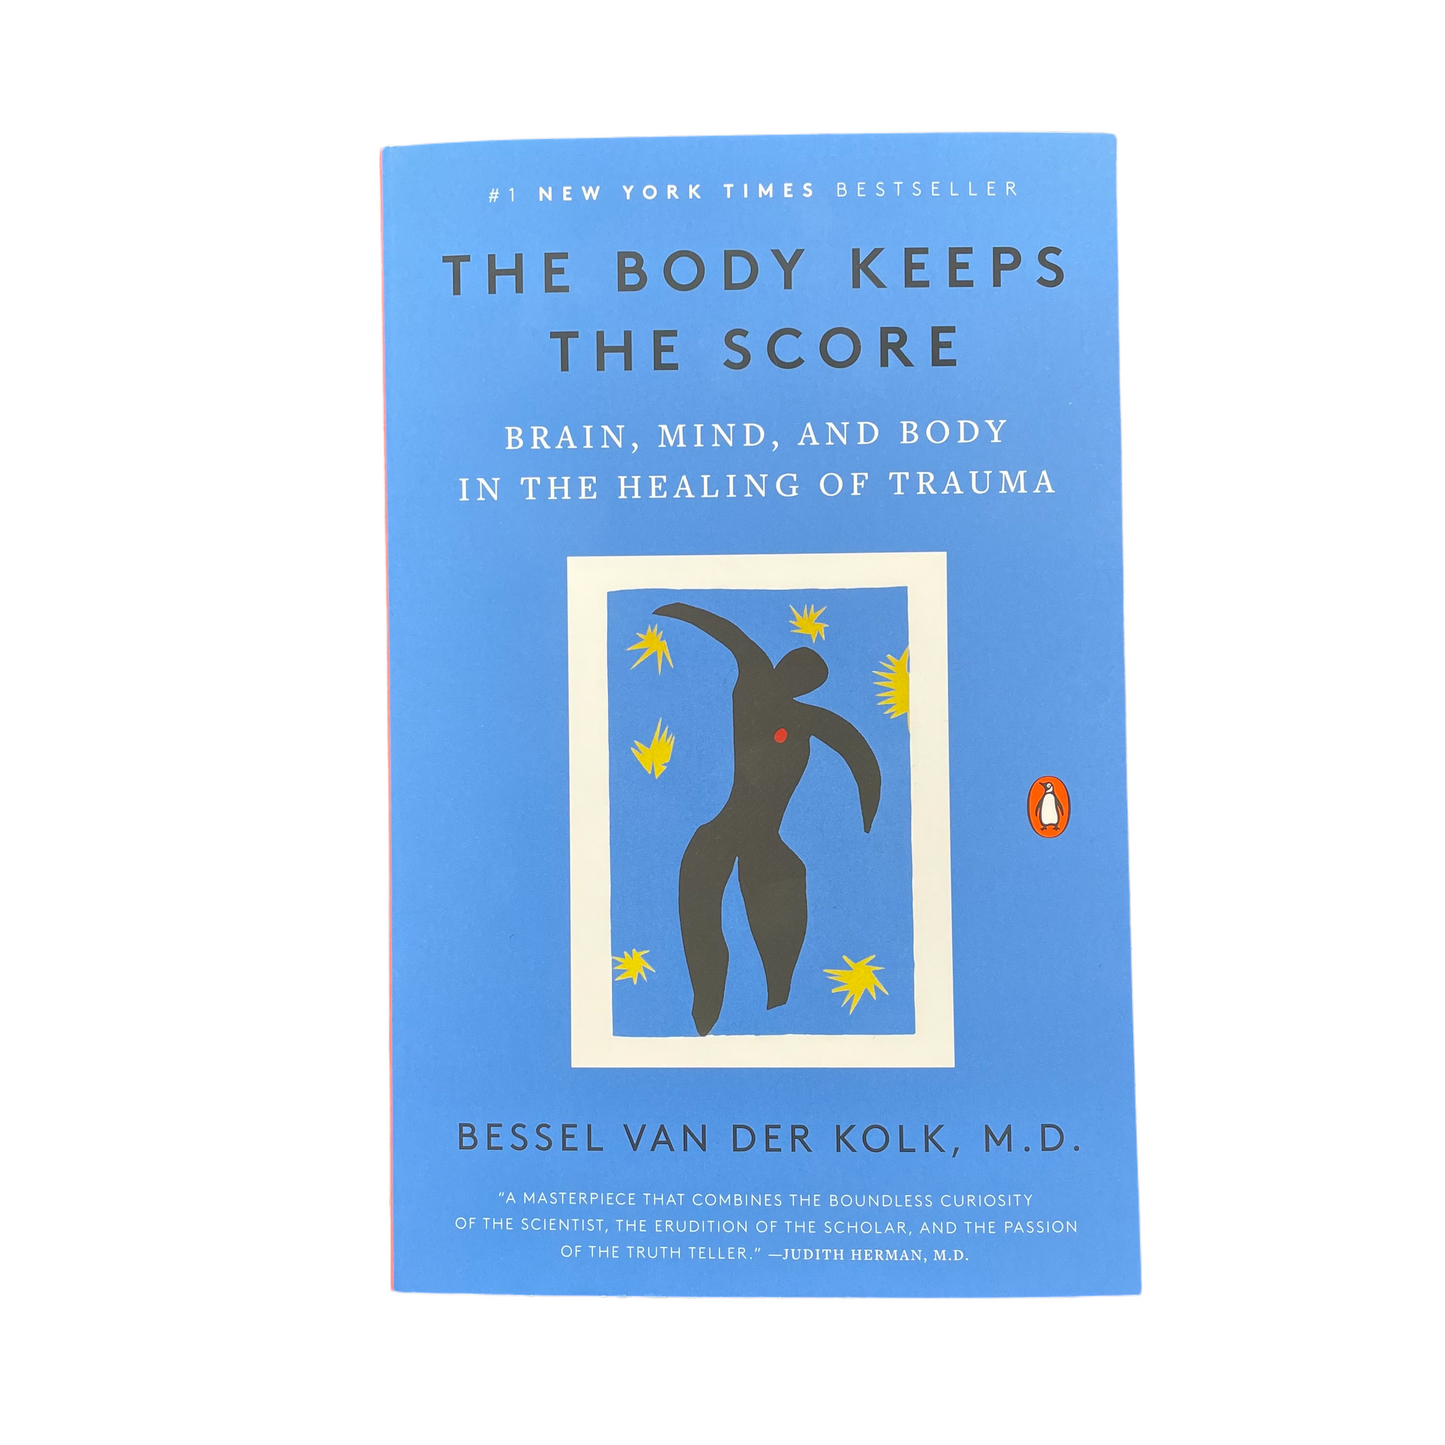 The Body Keeps the Score: Brain, Mind, and Body in the the Healing of Trauma